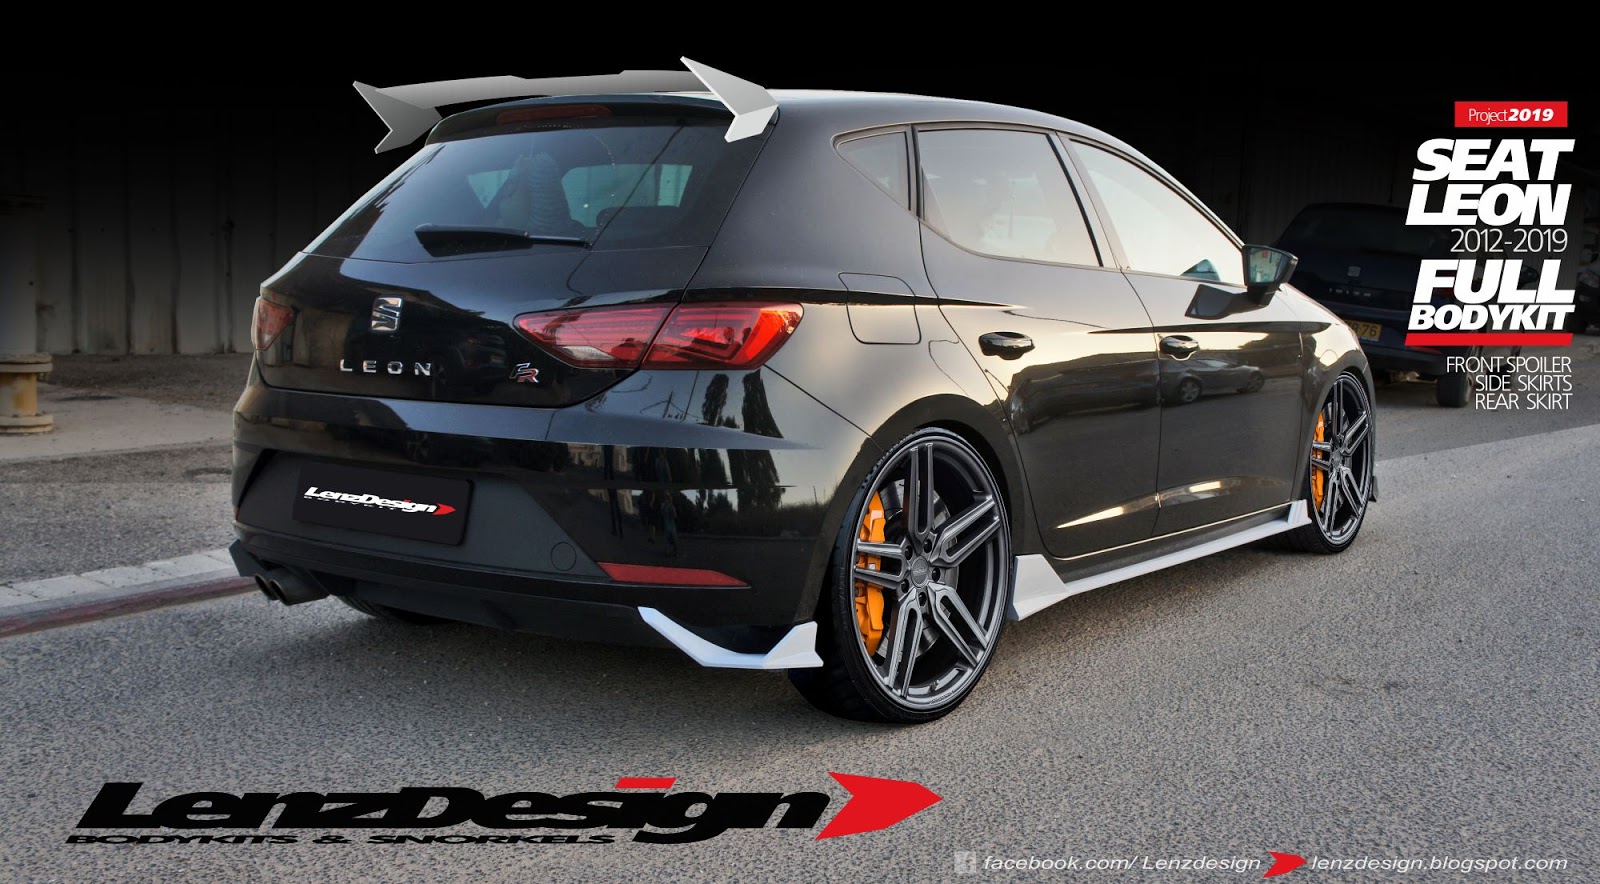 SEAT Leon 5F Body Kit from Lenzdesign Gets the Job Done - autoevolution